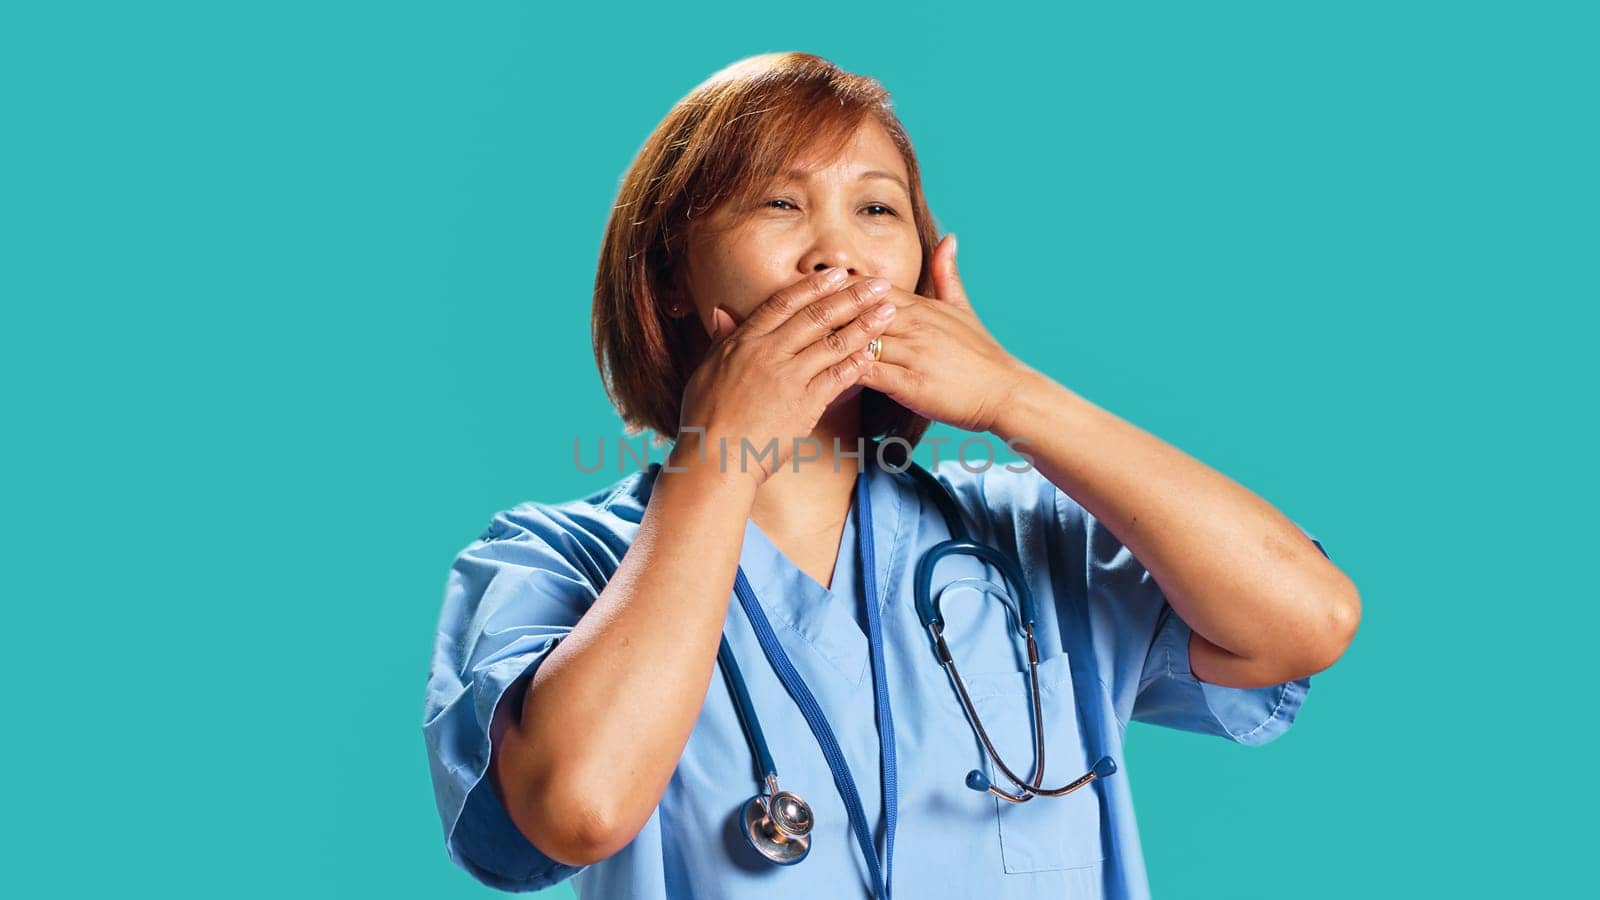 Nurse covering mouth with hands by DCStudio